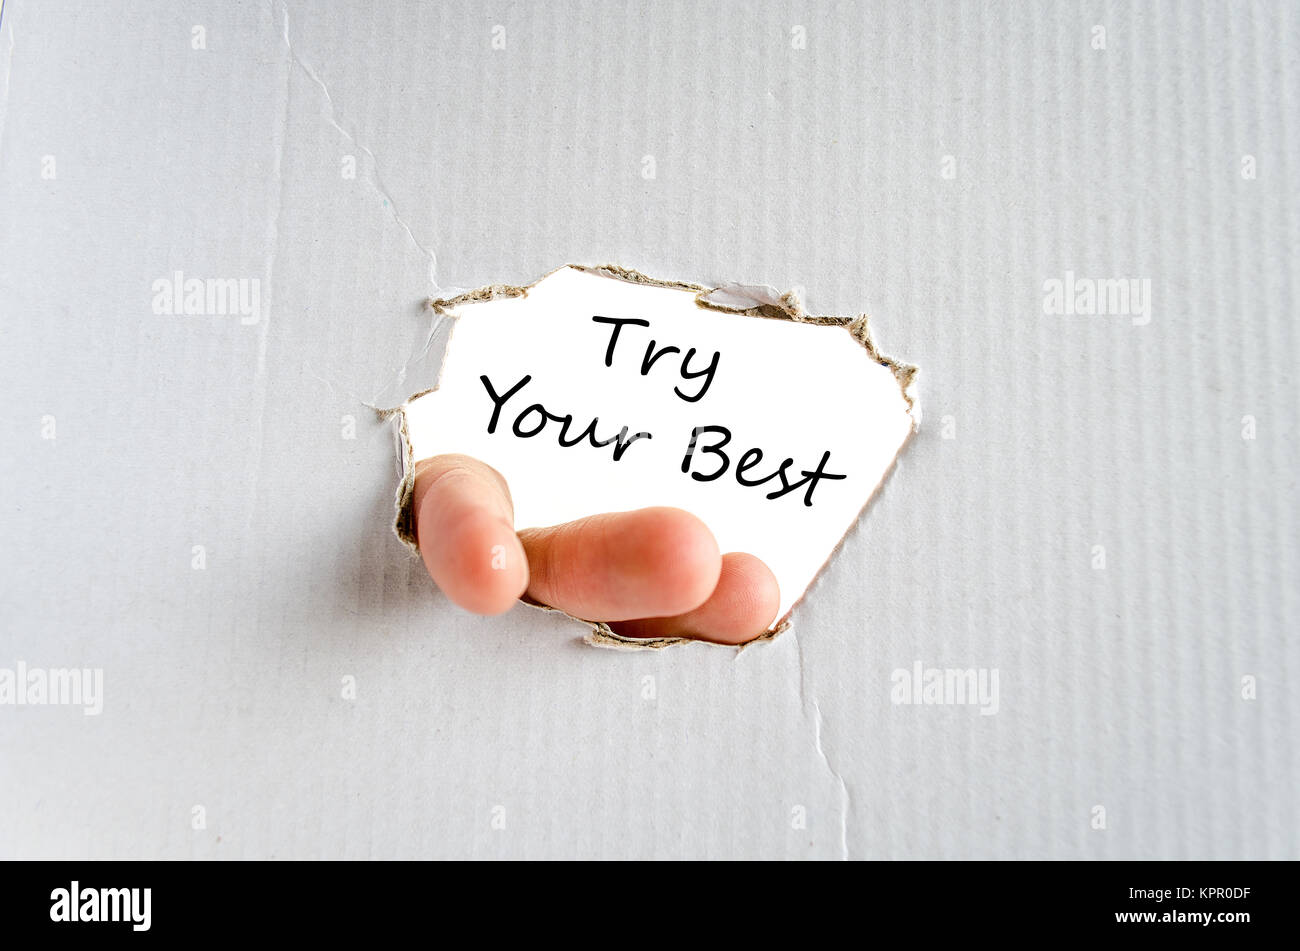 Try your best text concept Stock Photo